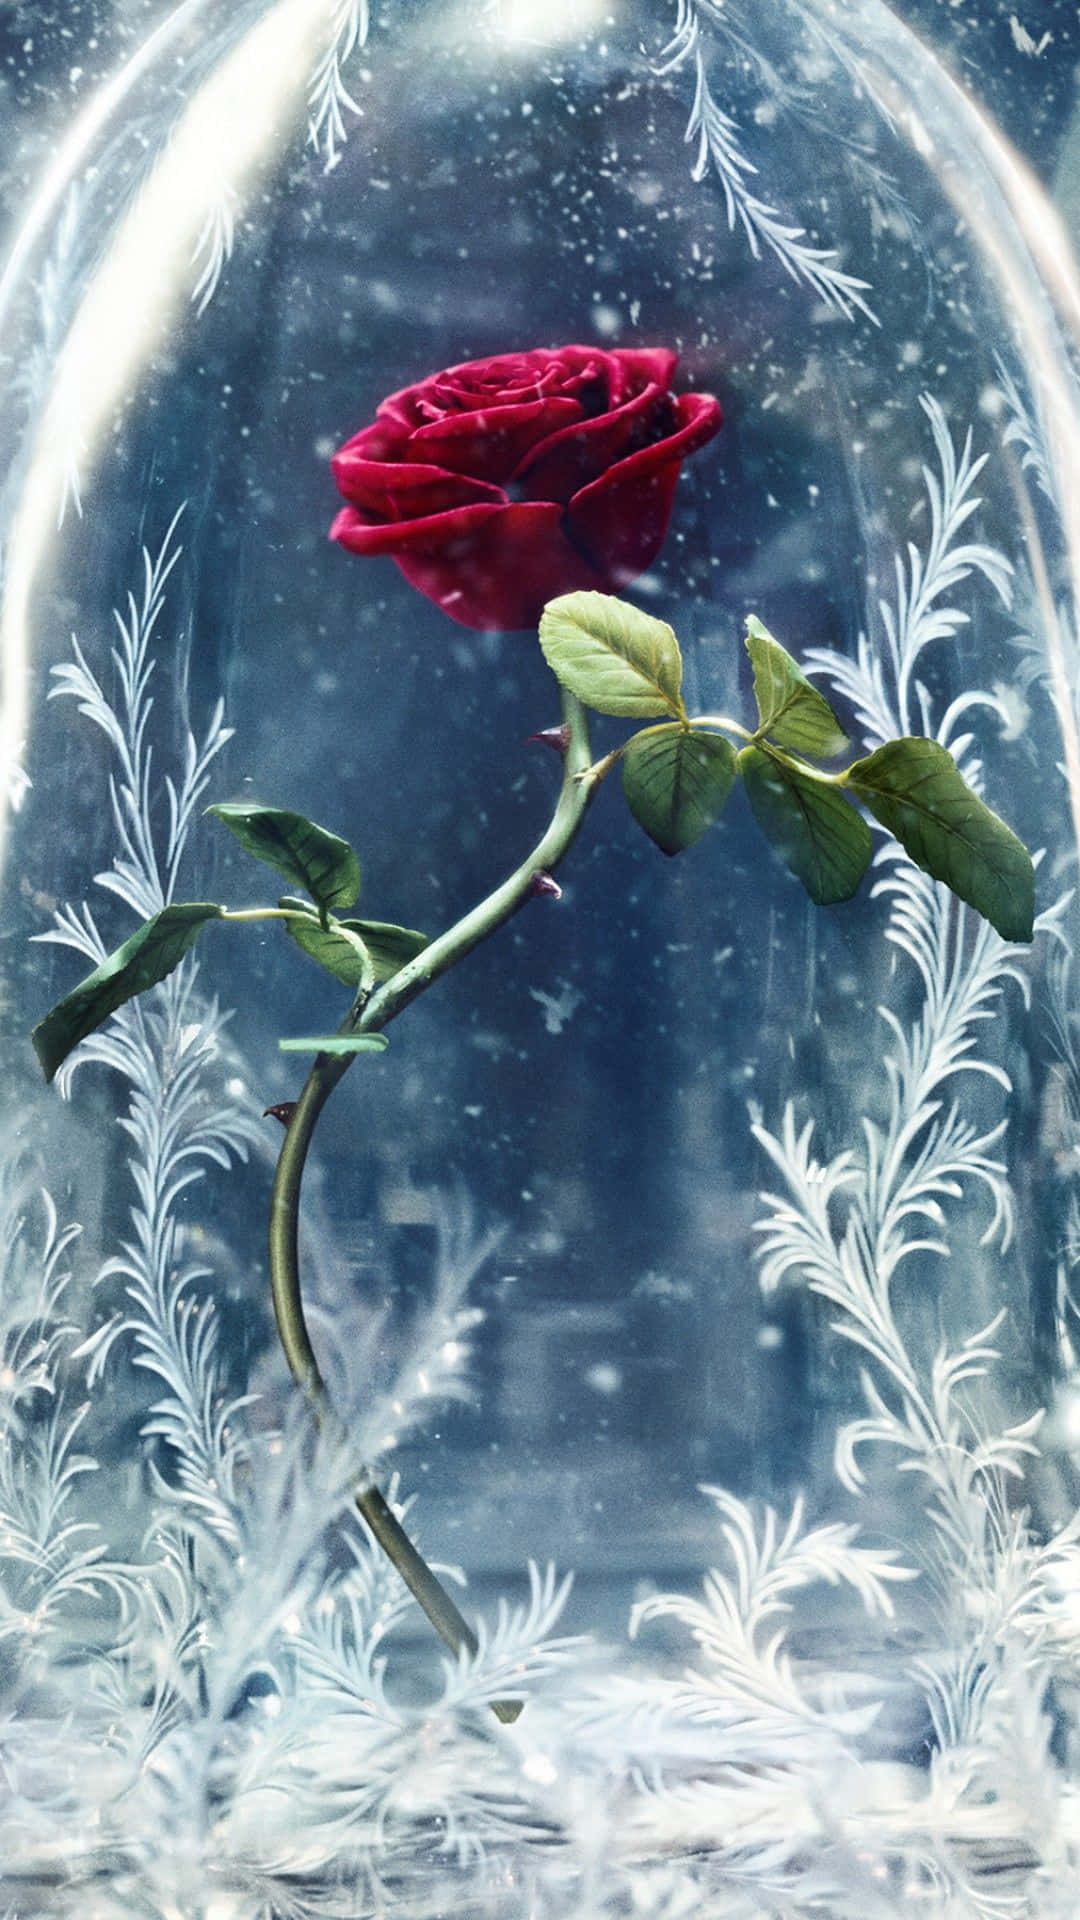 The Enchanted Rose In Beast's Castle